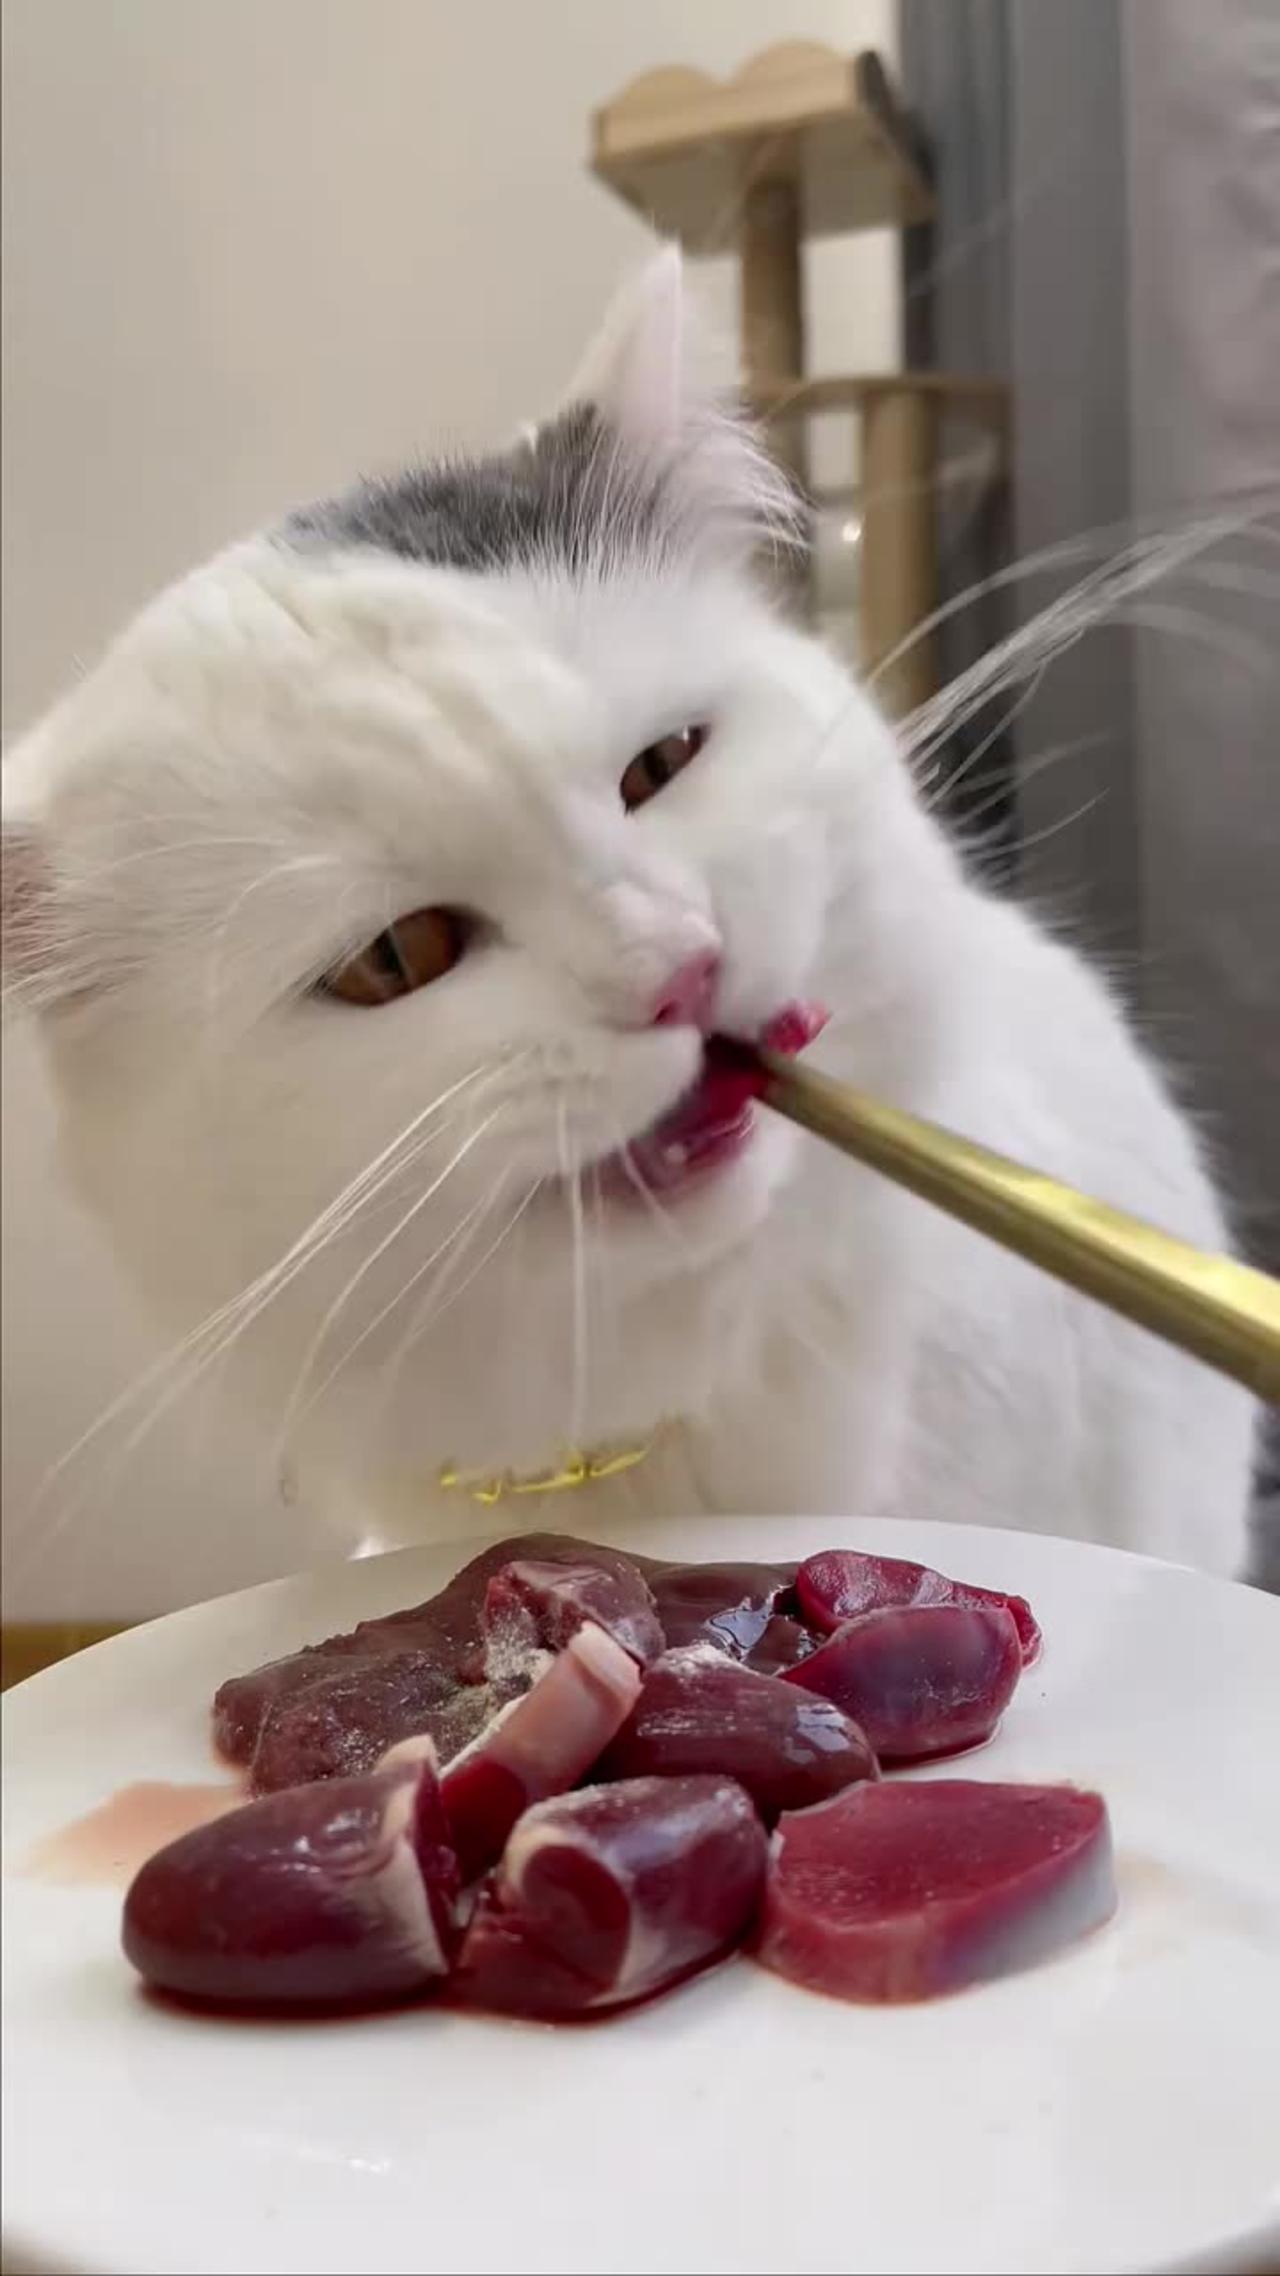 This cute cat eat so many foods alone.